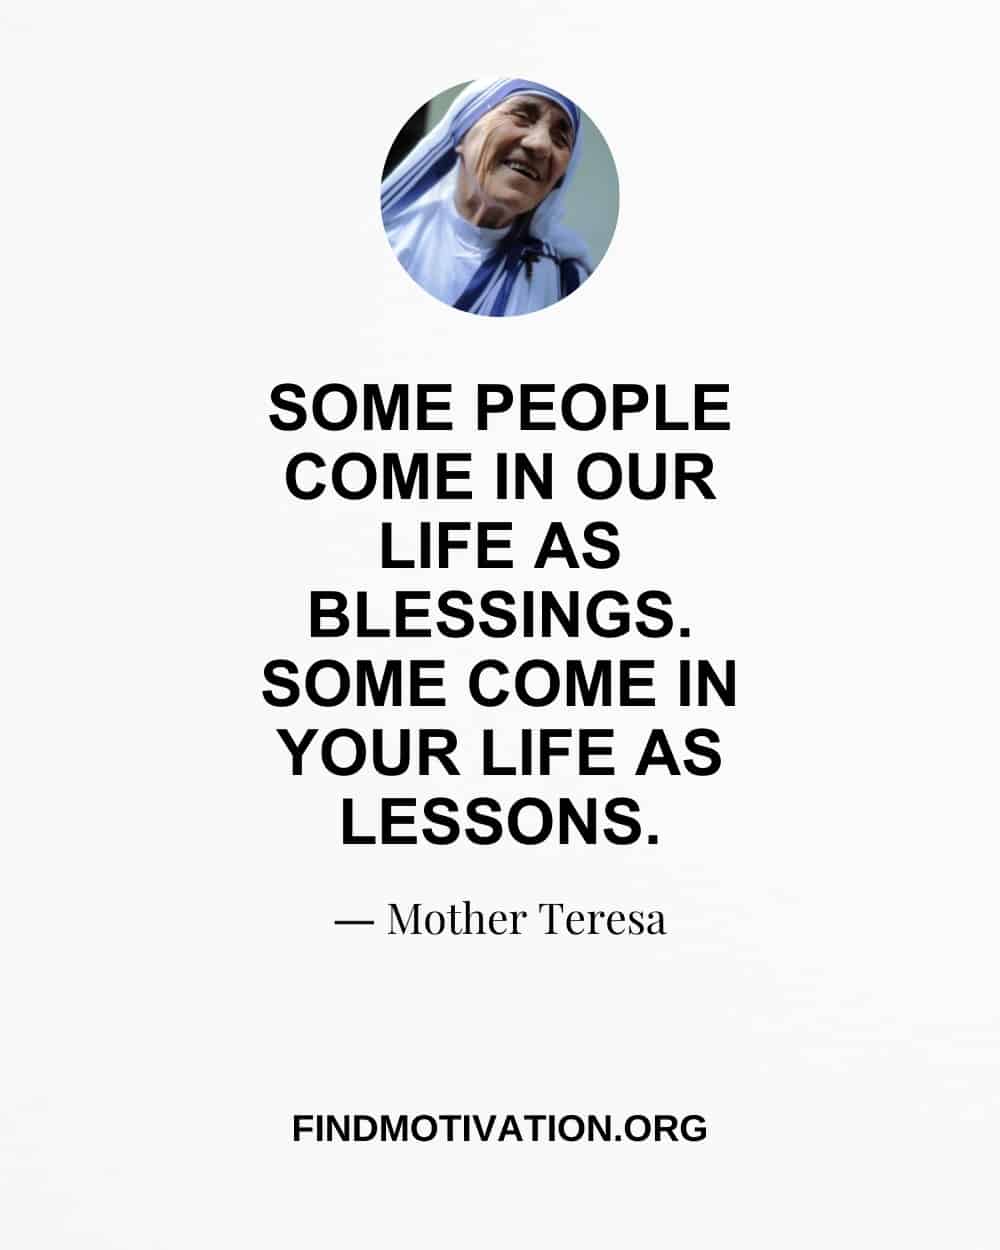 Mother Teresa Quotes To Spread Love In The World